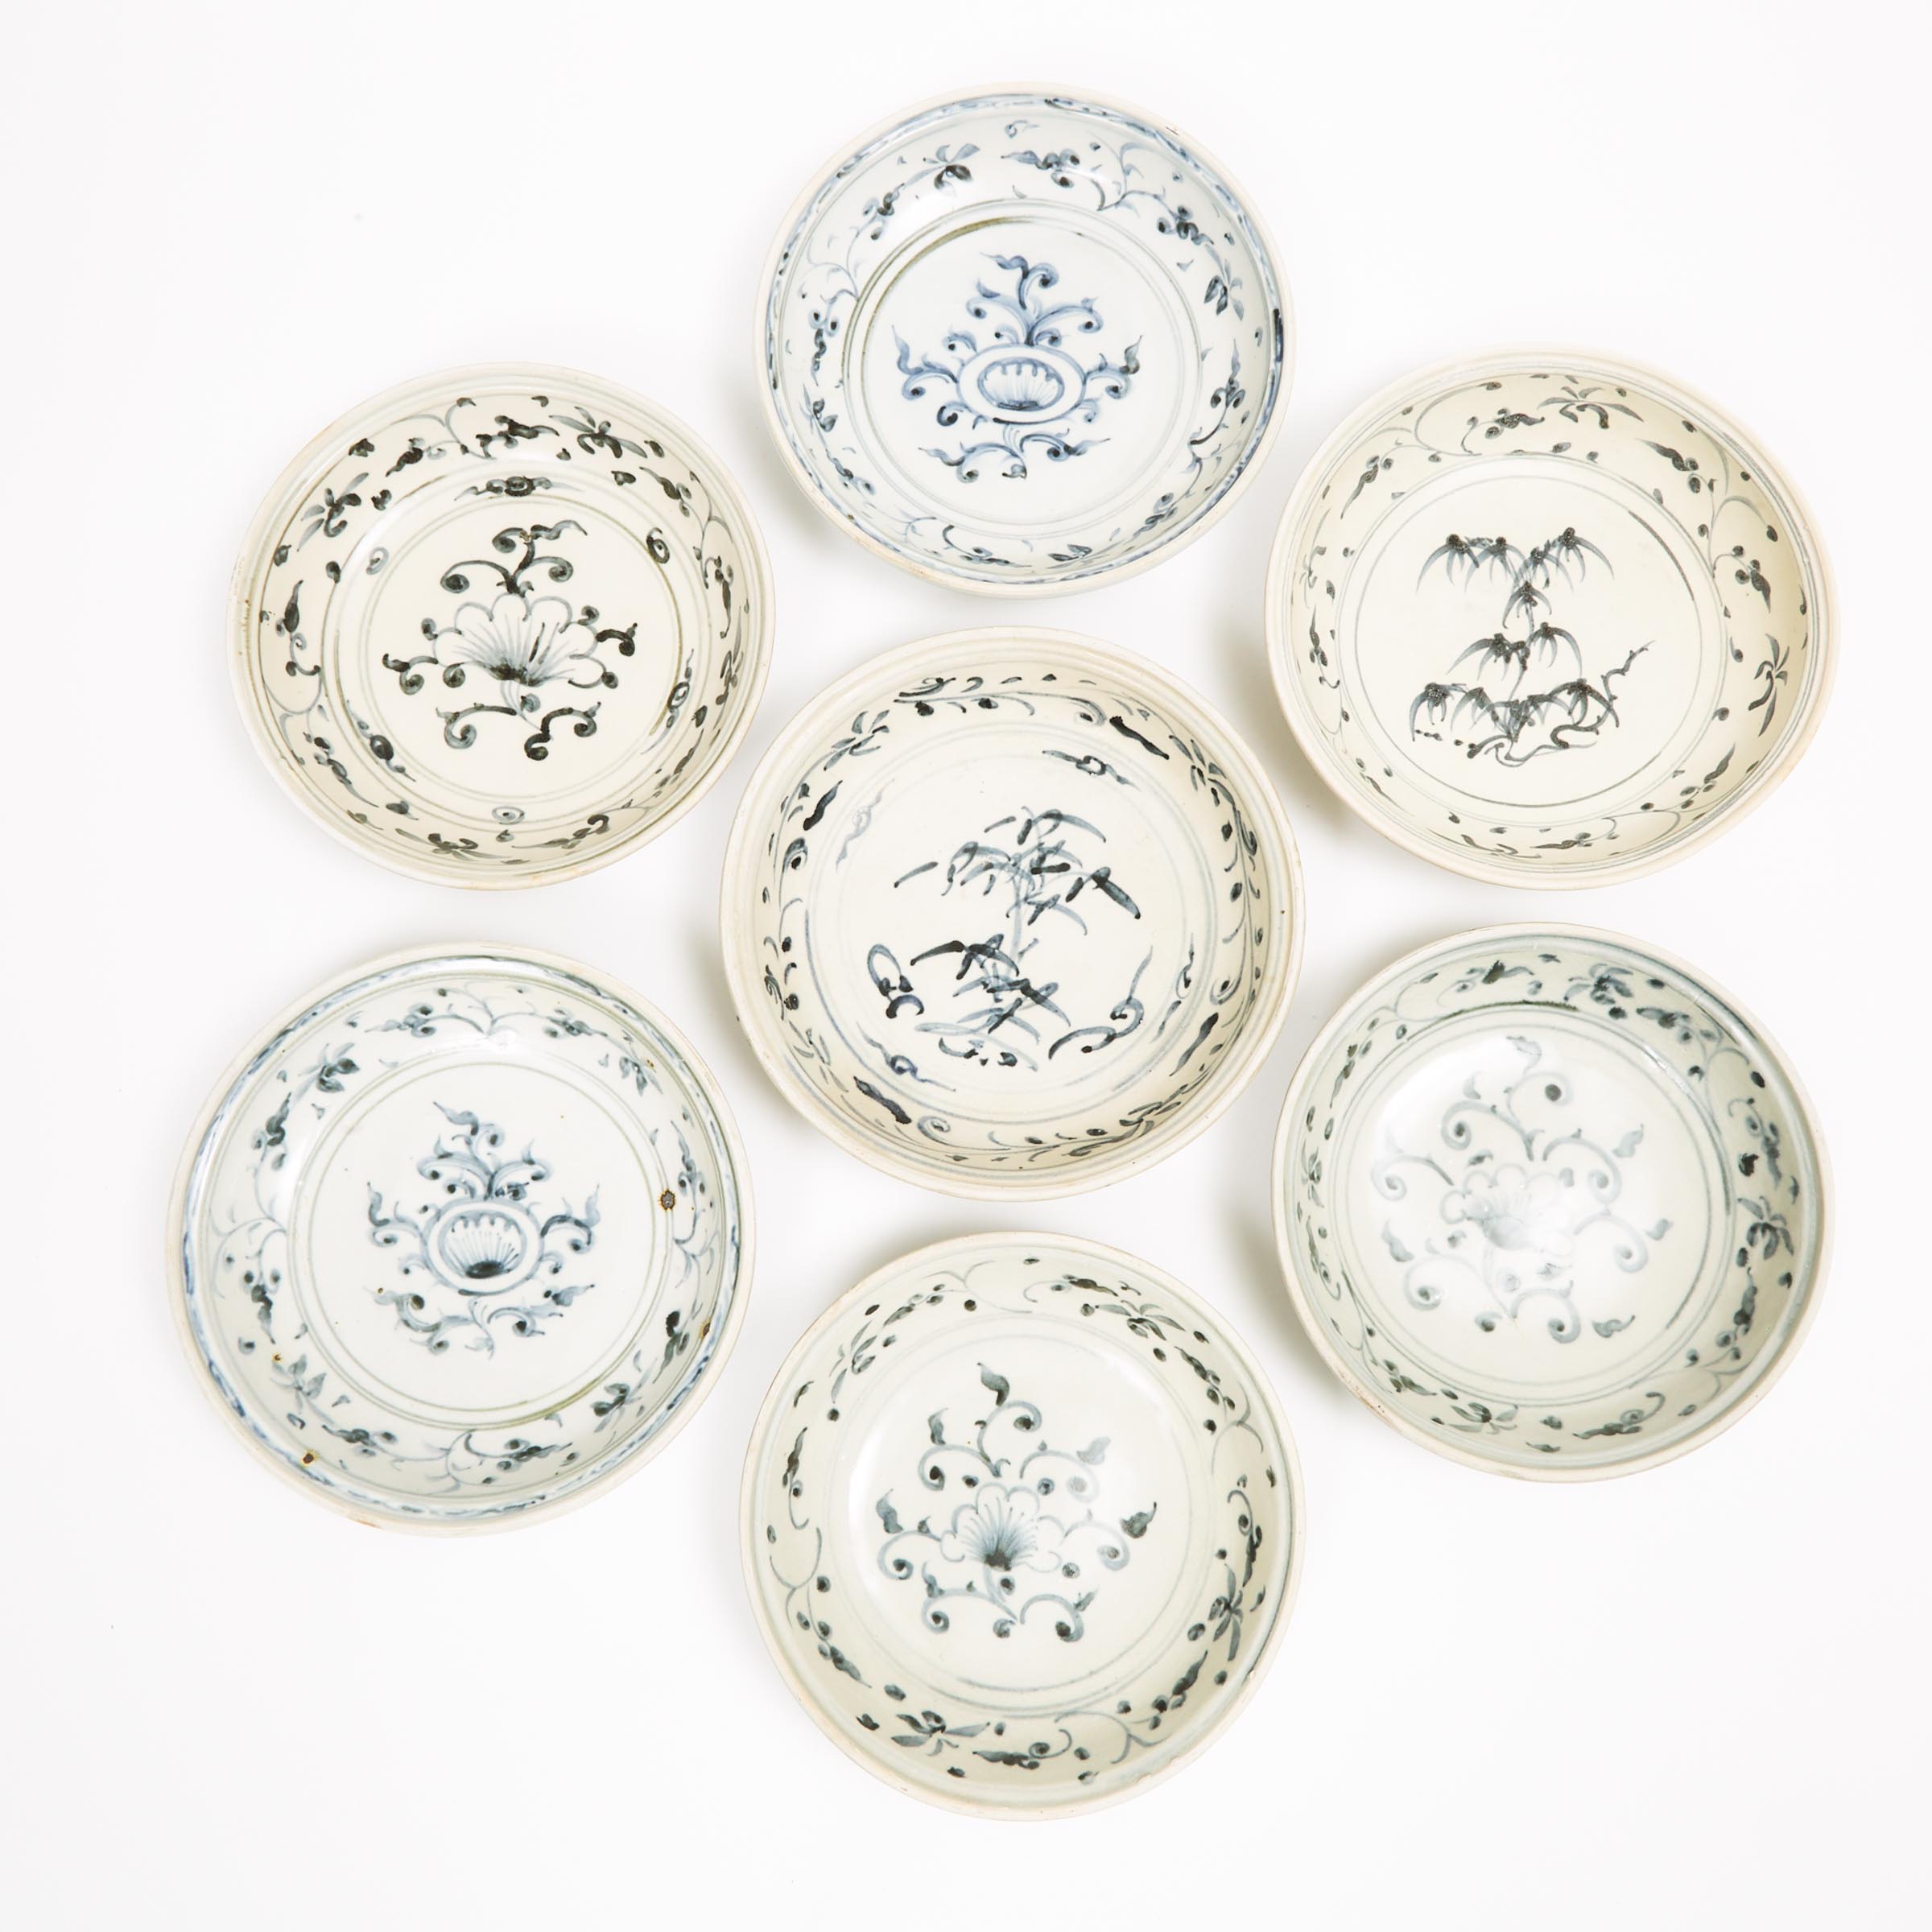 A Group of Seven 'Hoi An Hoard' Vietnamese Blue and White Circular Dishes, 15th Century